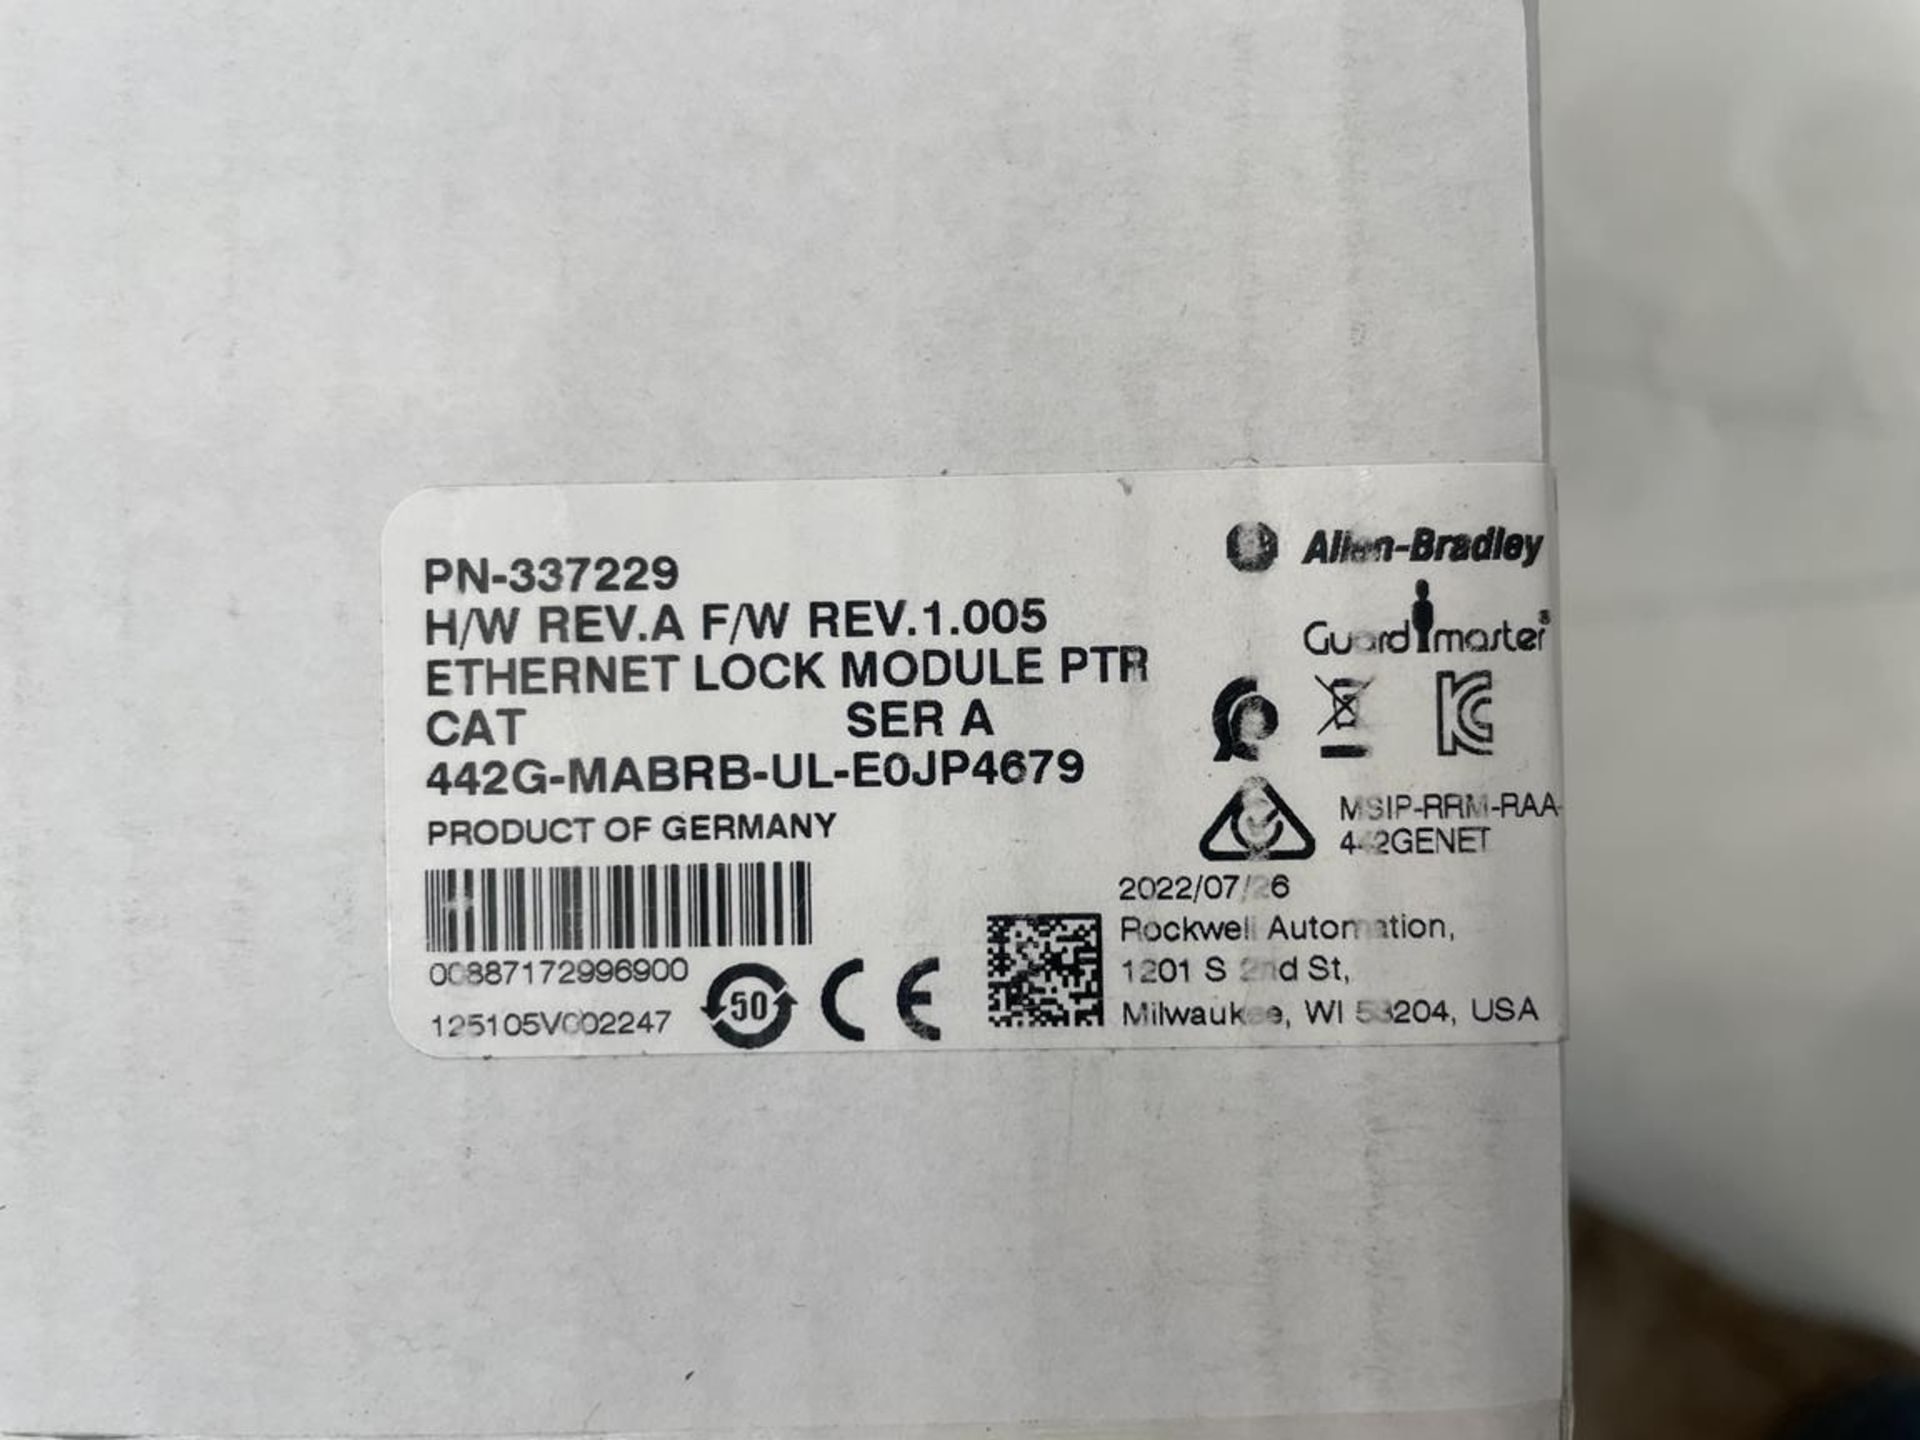 10x (no.) Allen-Bradley, ethernet lock modules, Part No. 337229 (boxed and unused) - Image 2 of 3